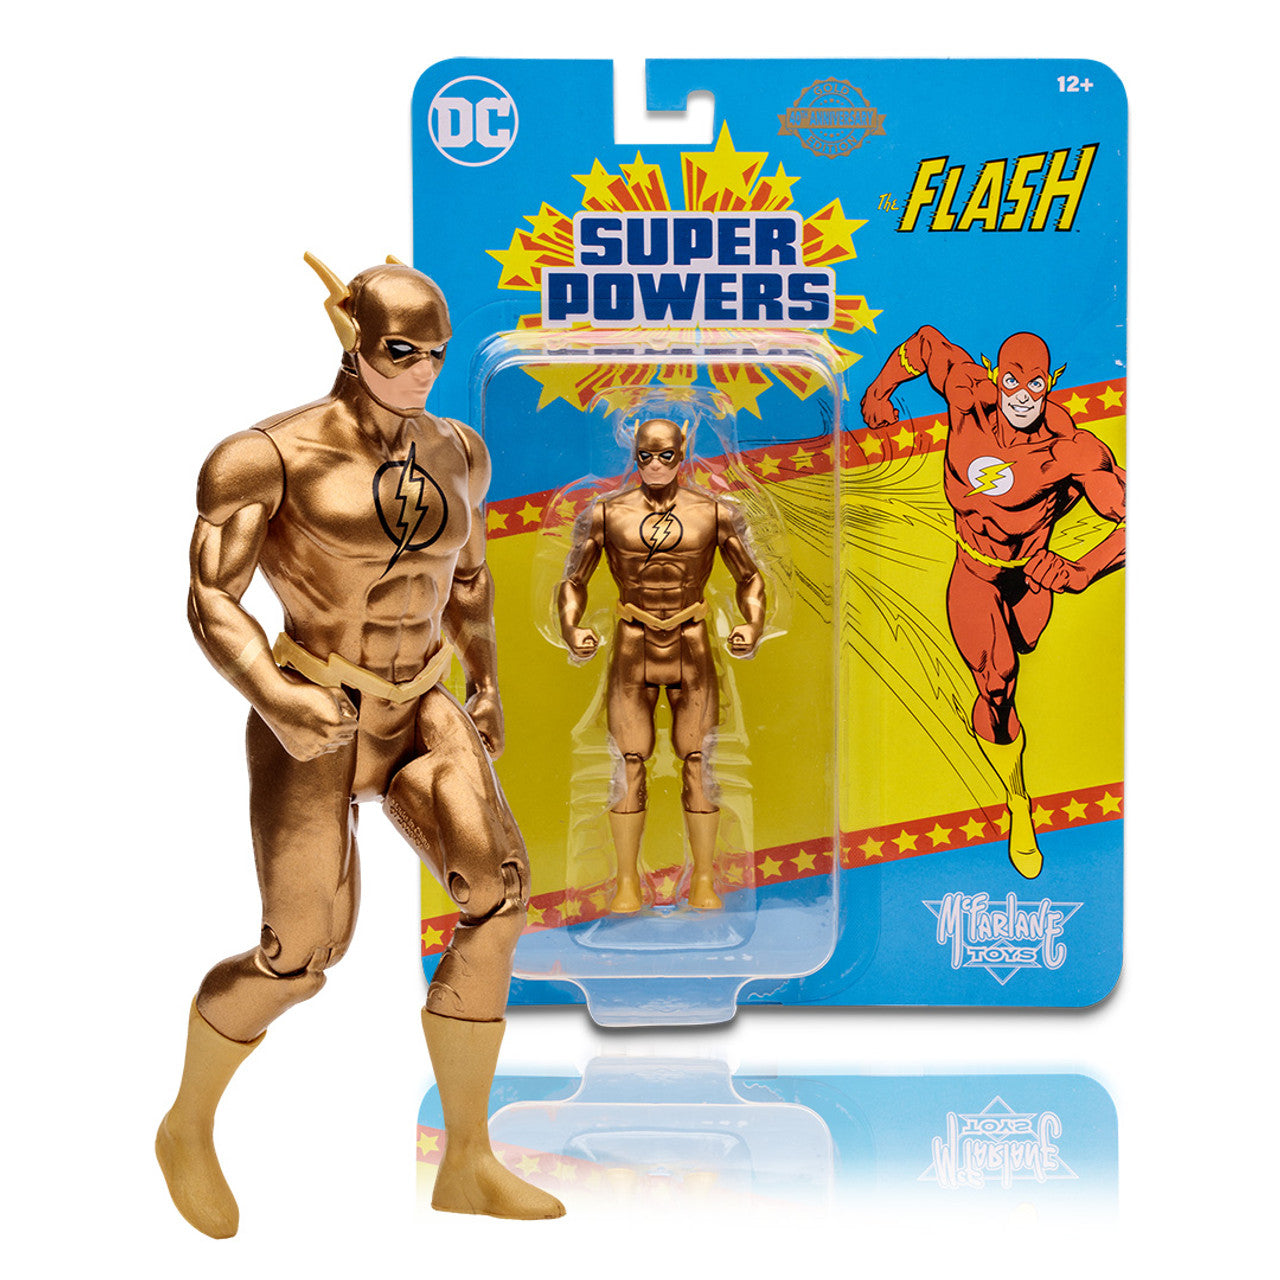 DC Super Powers Figures - 4.5" Scale The Flash